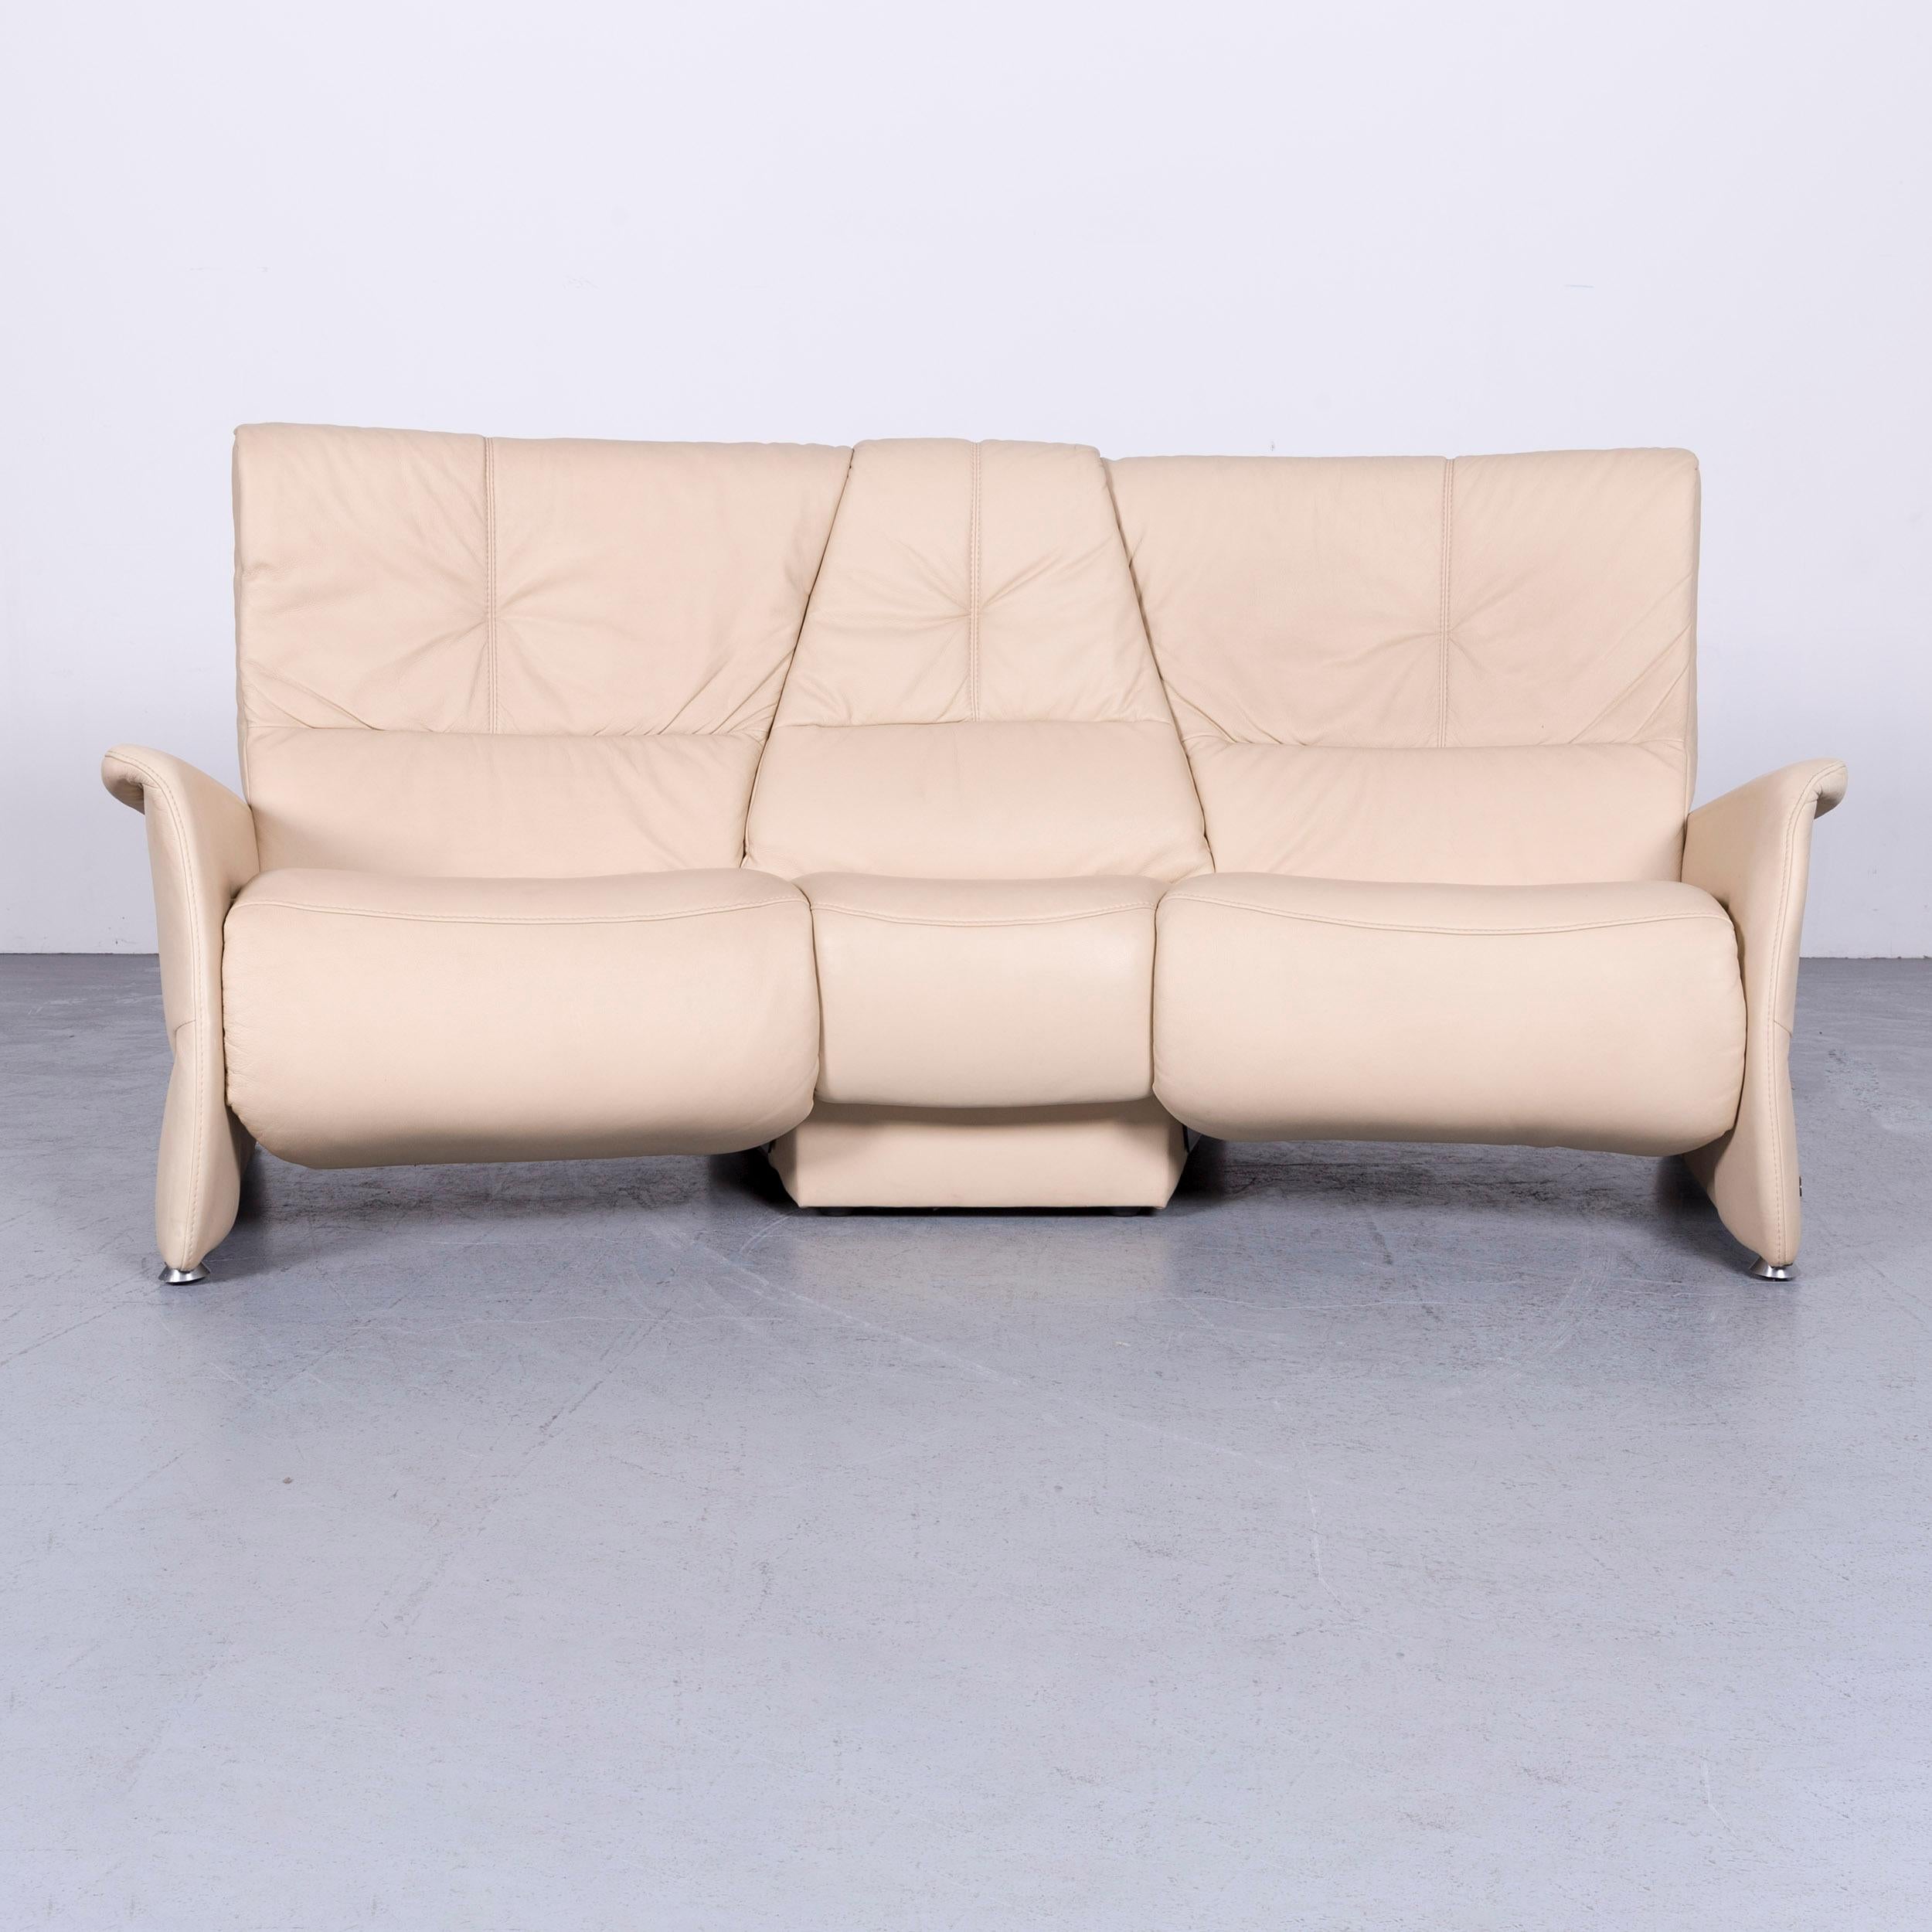 We bring to you a Himolla designer sofa beige three-seat couch recliner function.